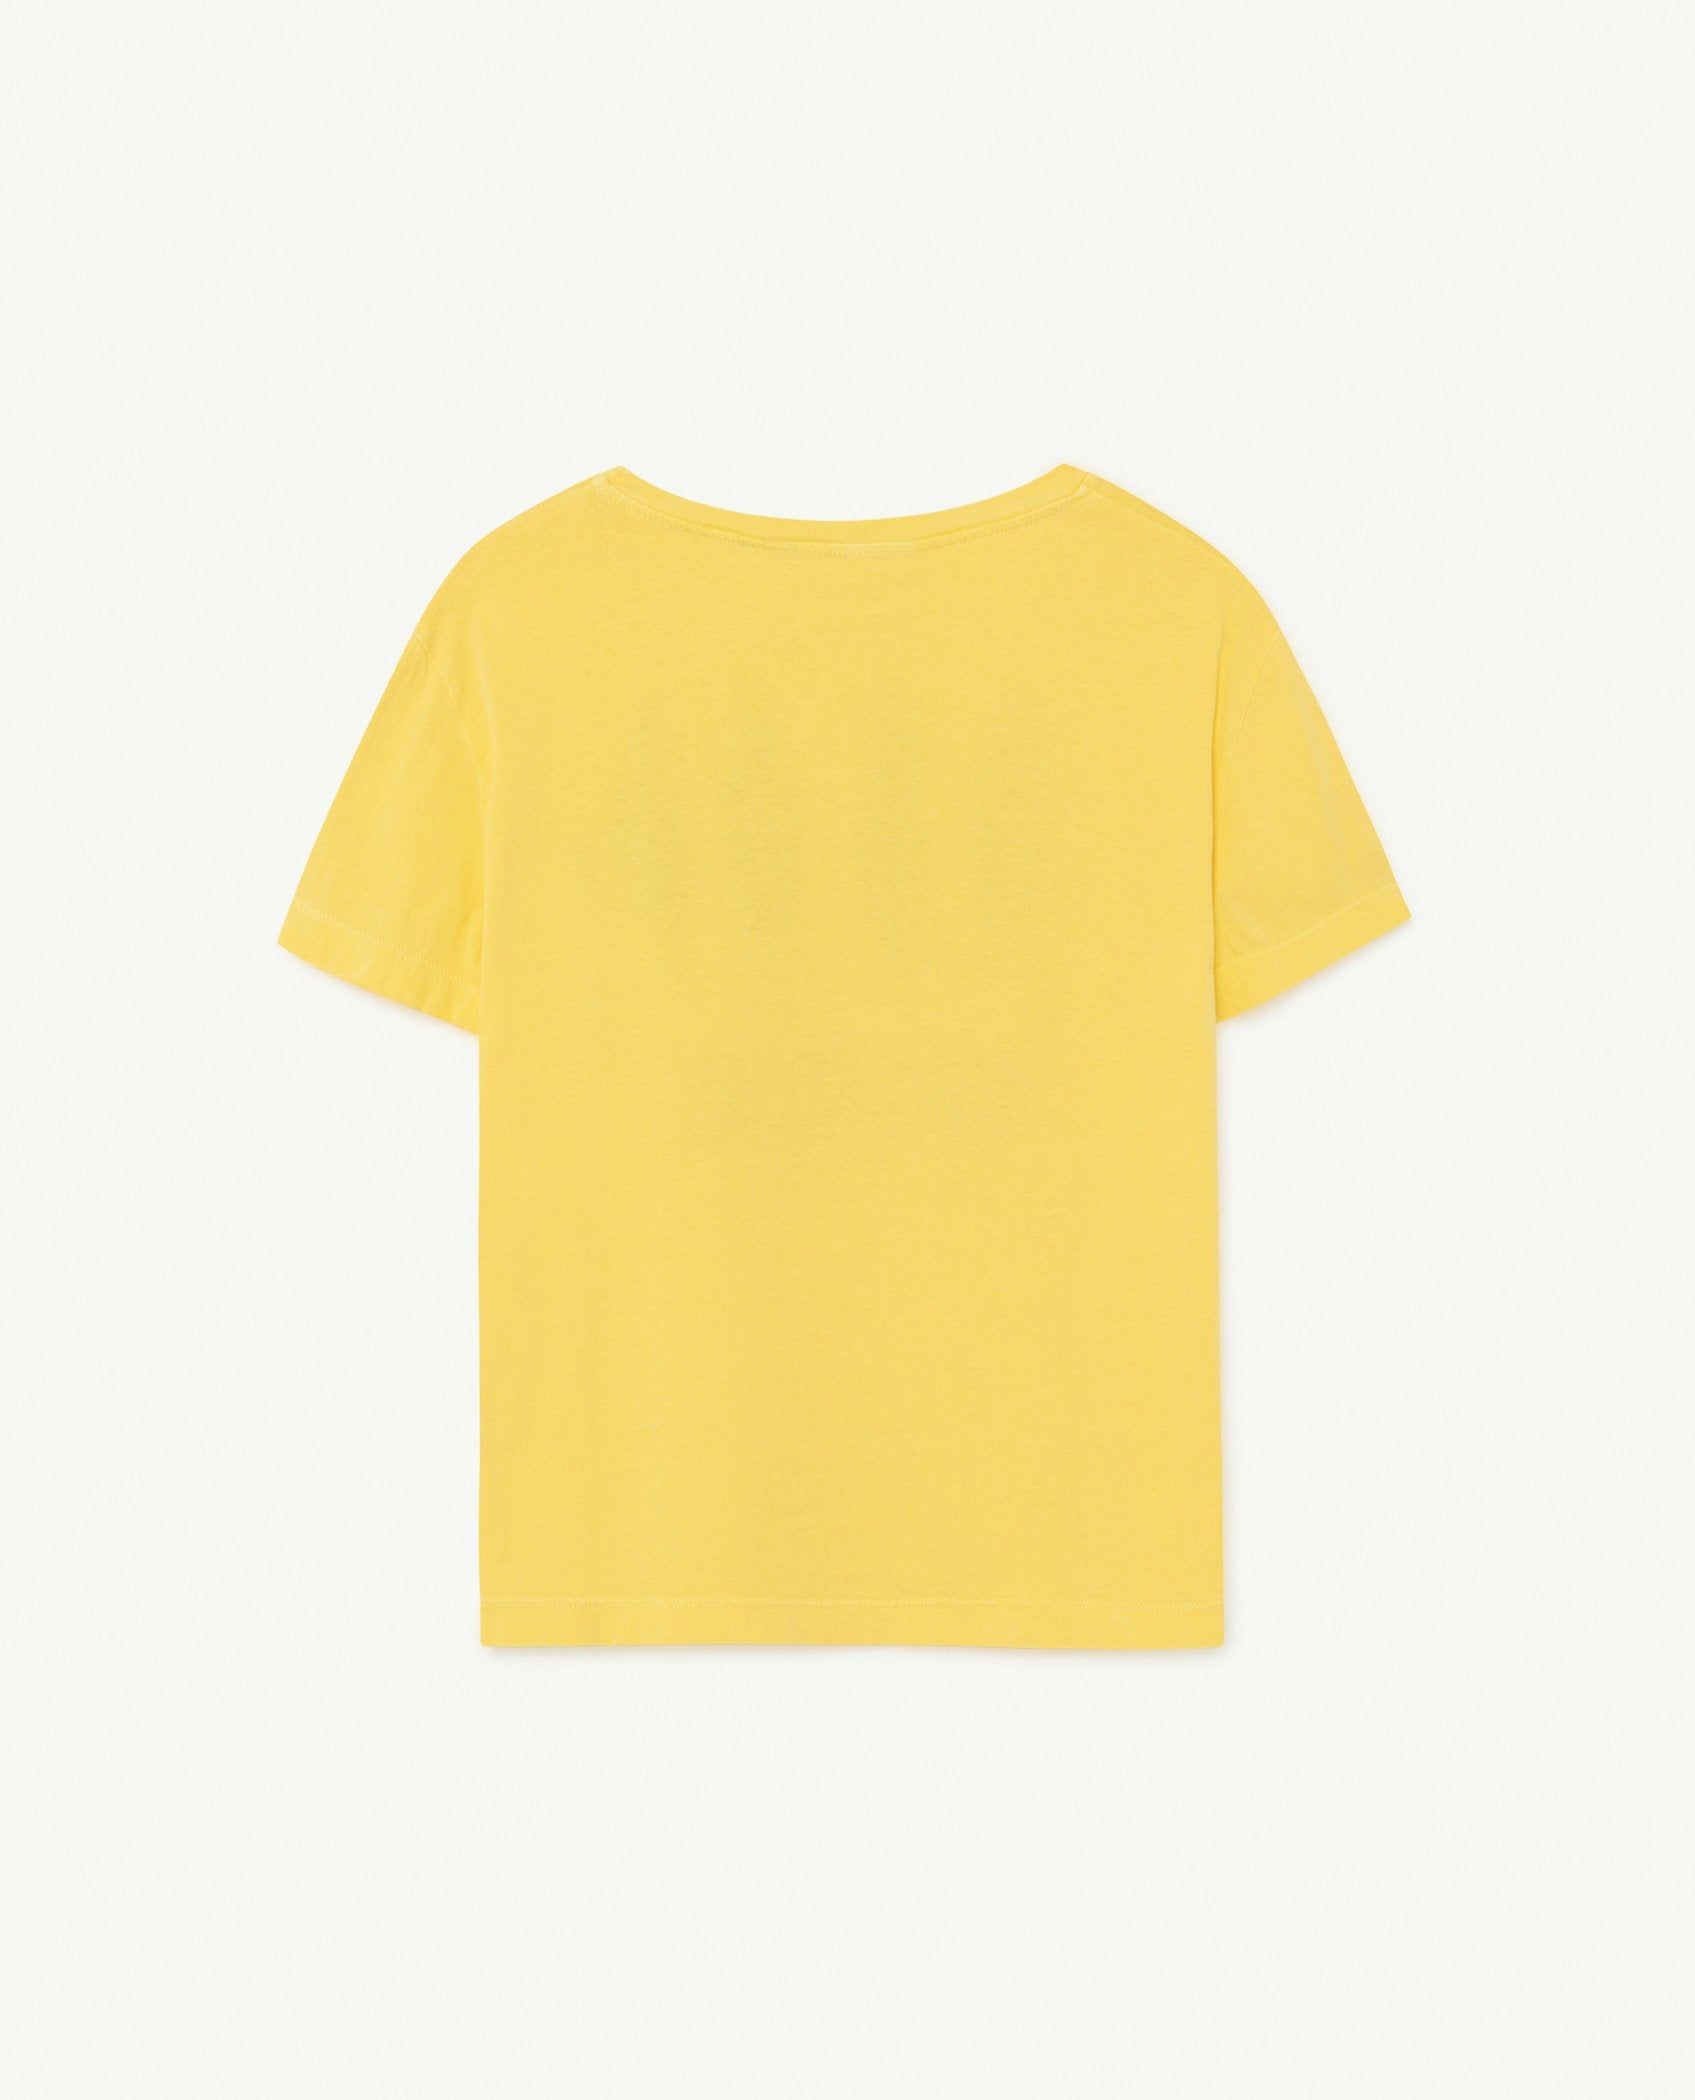 Soft Yellow Cyprus Rooster T-Shirt PRODUCT BACK